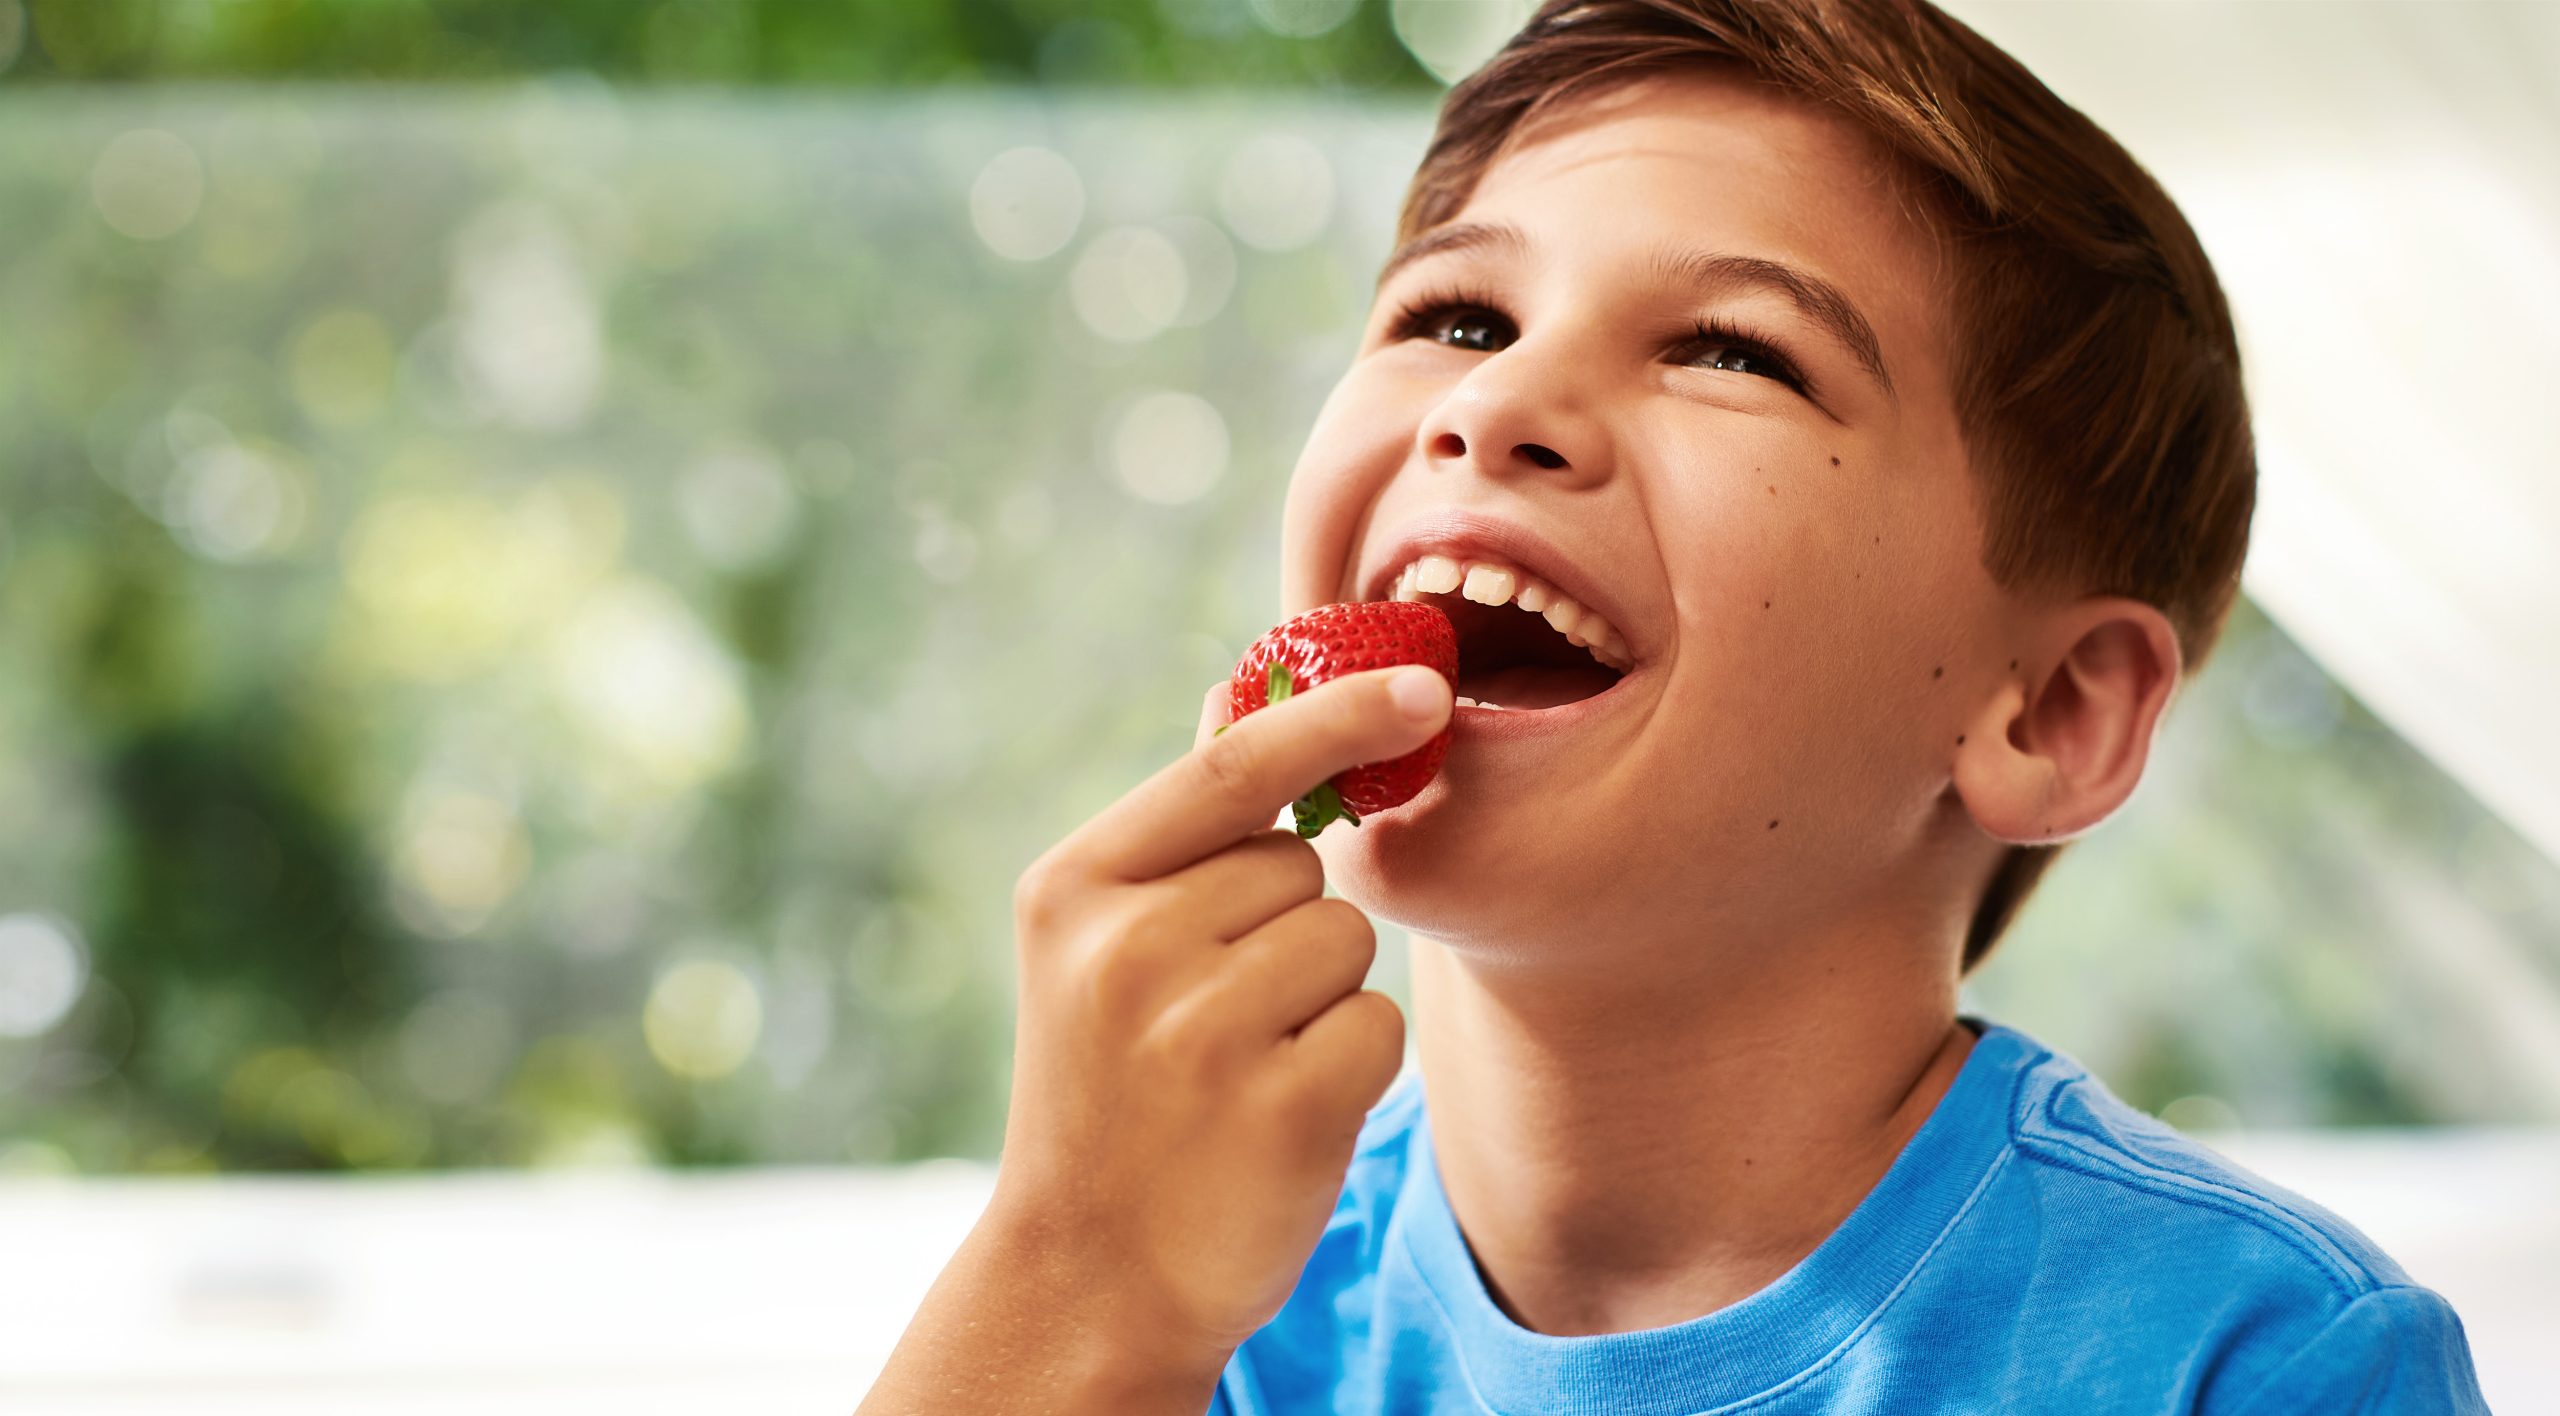 Image of a boy eating an Always Fresh strawberry